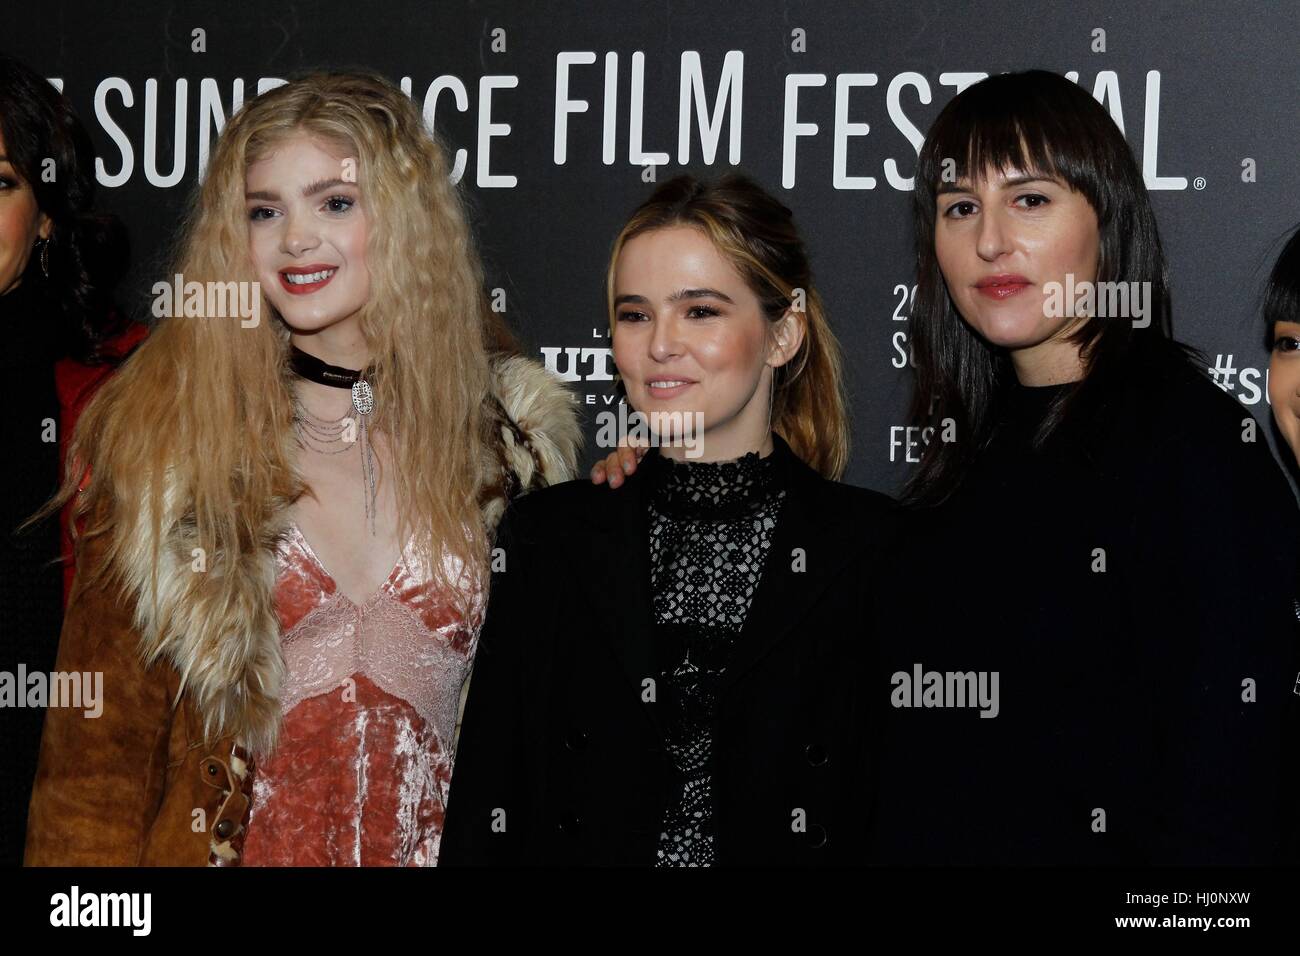 Utah, USA. 21st, January, 2017. Elena Kampouris, Zoey Deutch, Ry Russo-Young at arrivals for Before I Fall Premiere at Sundance Film Festival 2017, Eccles Theatre in Utah, USA. Credit: James Atoa/Everett Collection/Alamy Live News Stock Photo